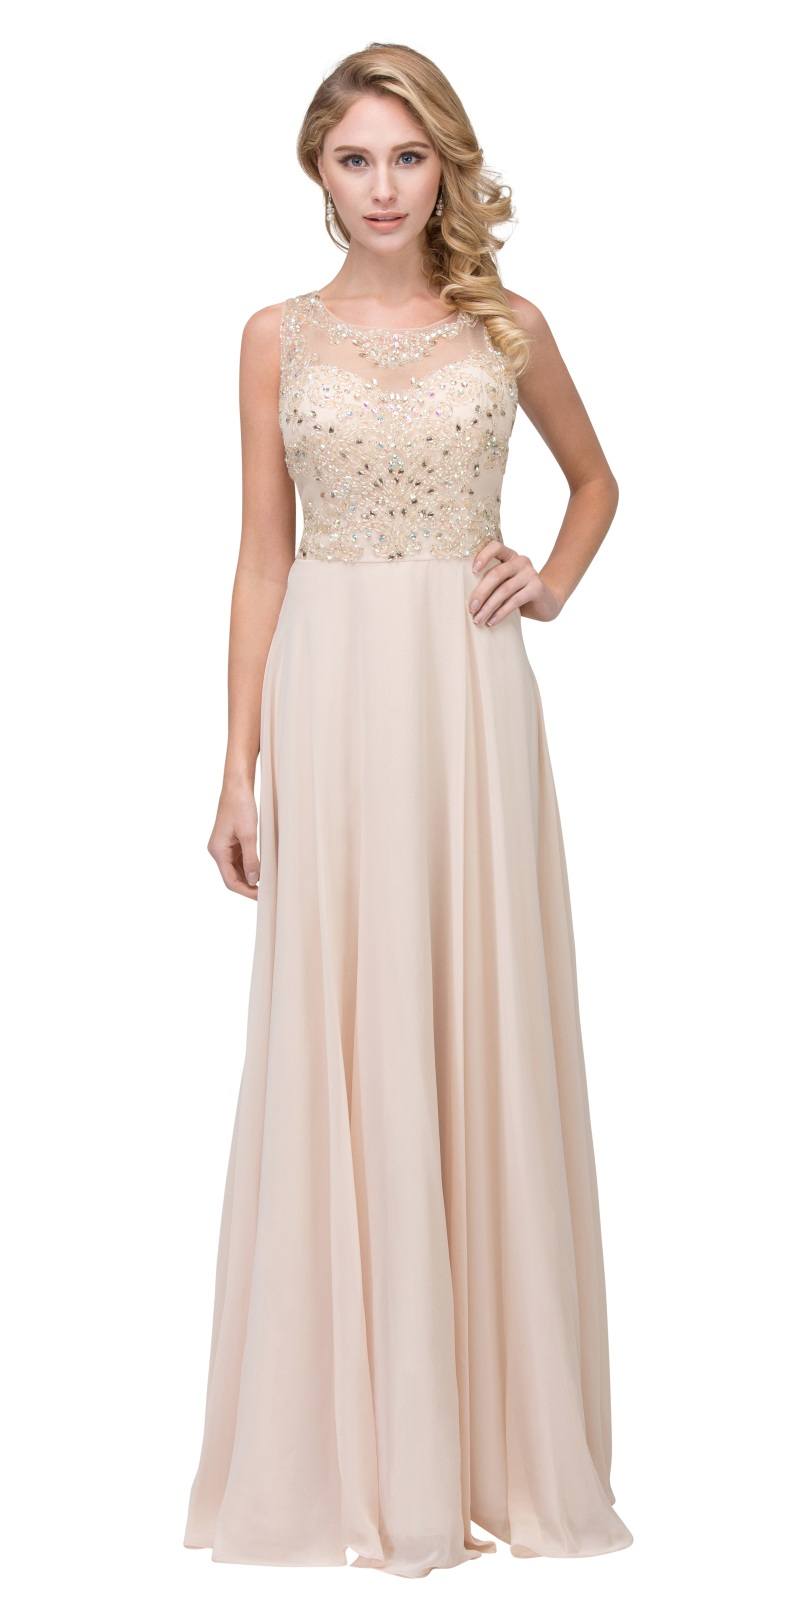 Starbos USA 17182 Blush Long Formal Dress Sleeveless with Beaded Bodice ...